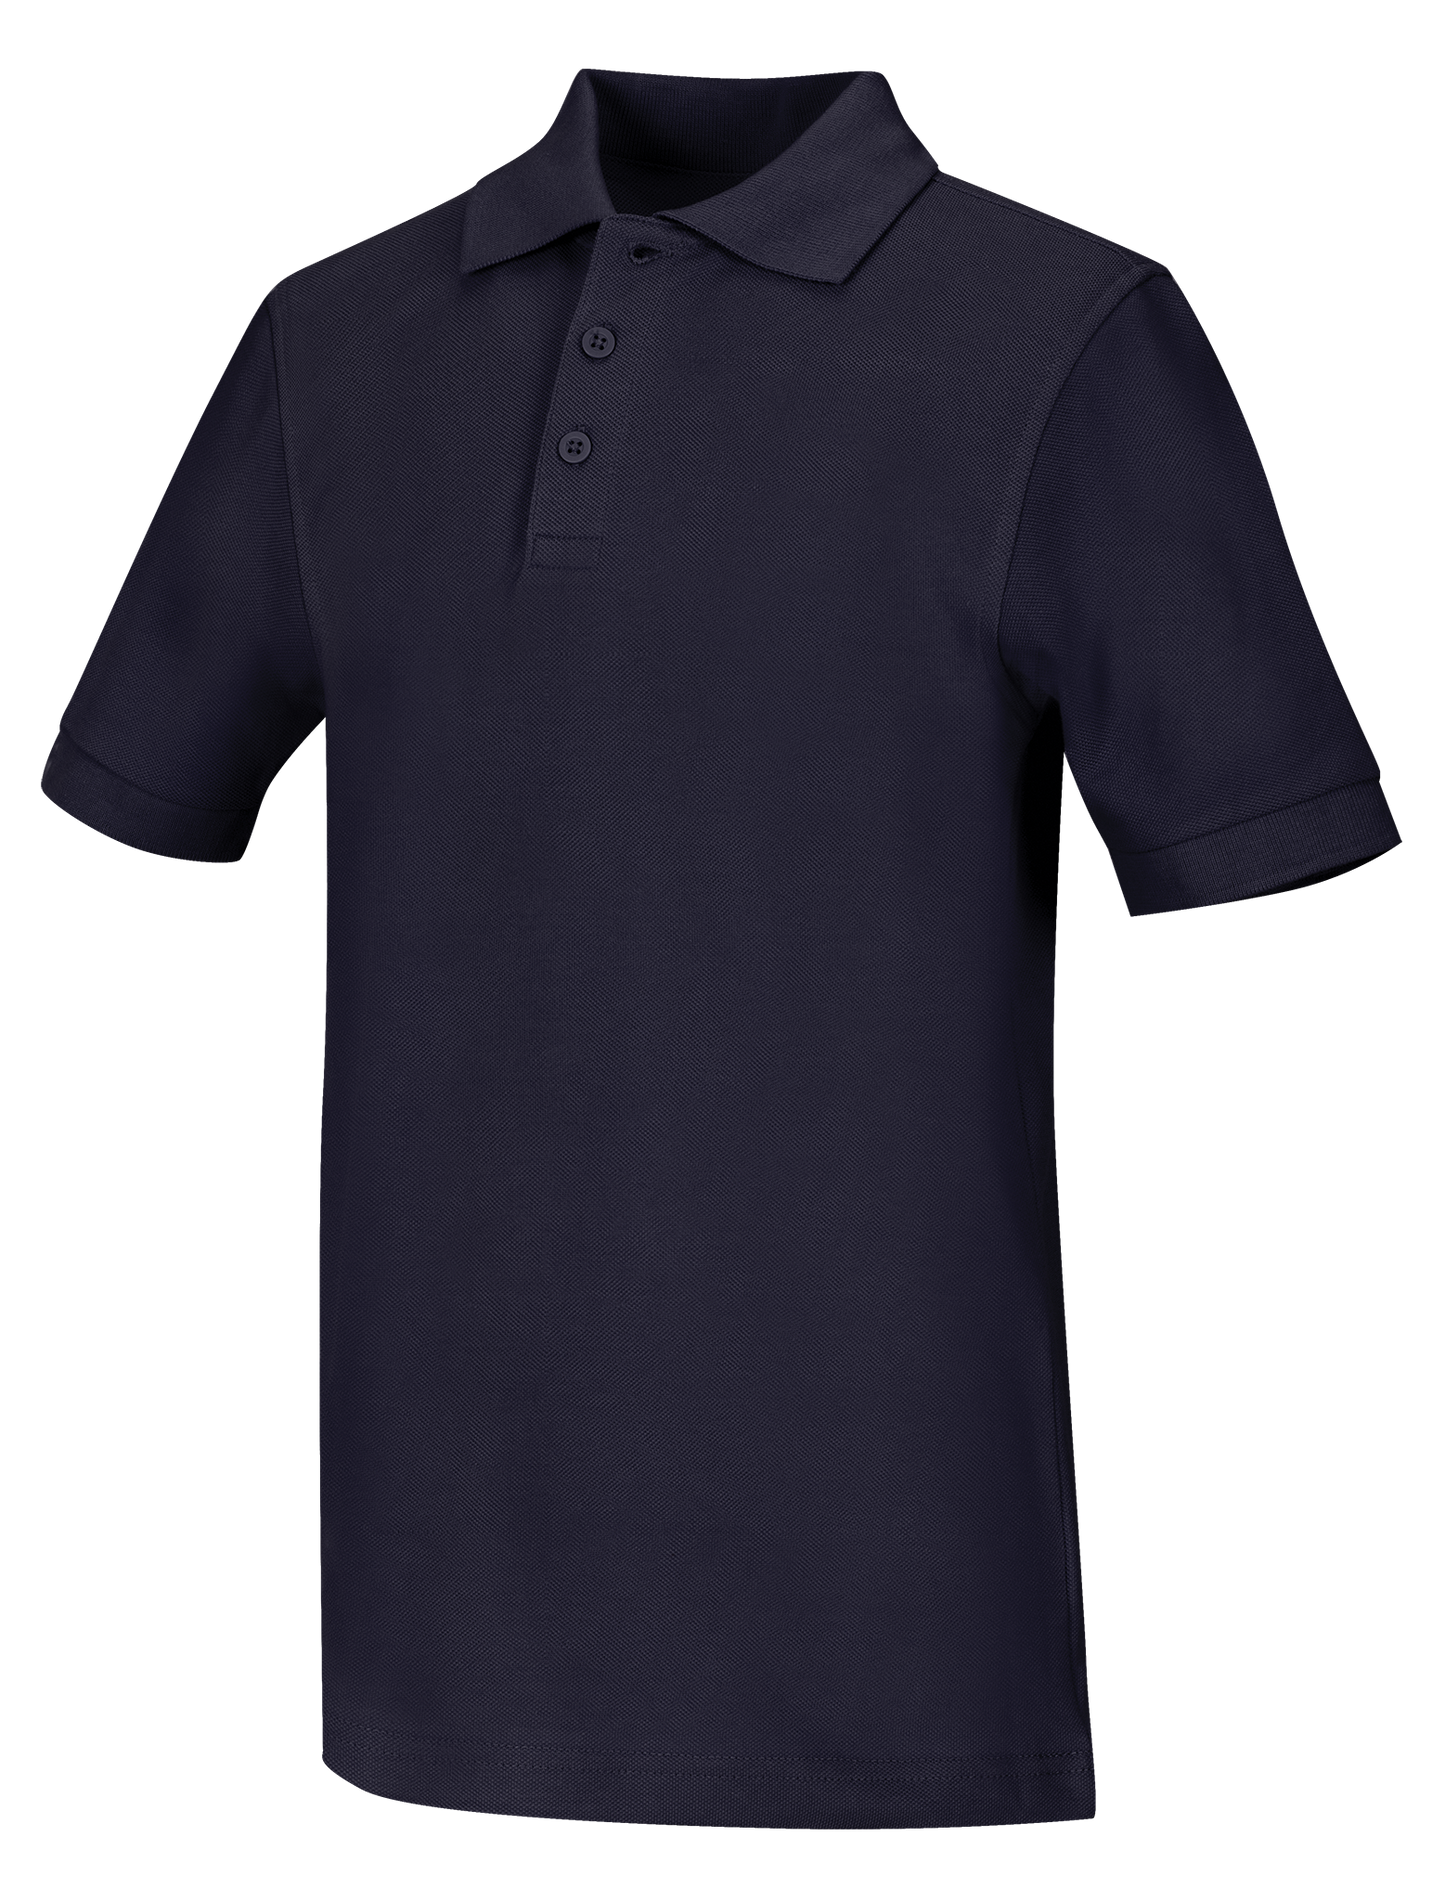 OLD Fit Toddler Unisex Short Sleeve Pique Polo